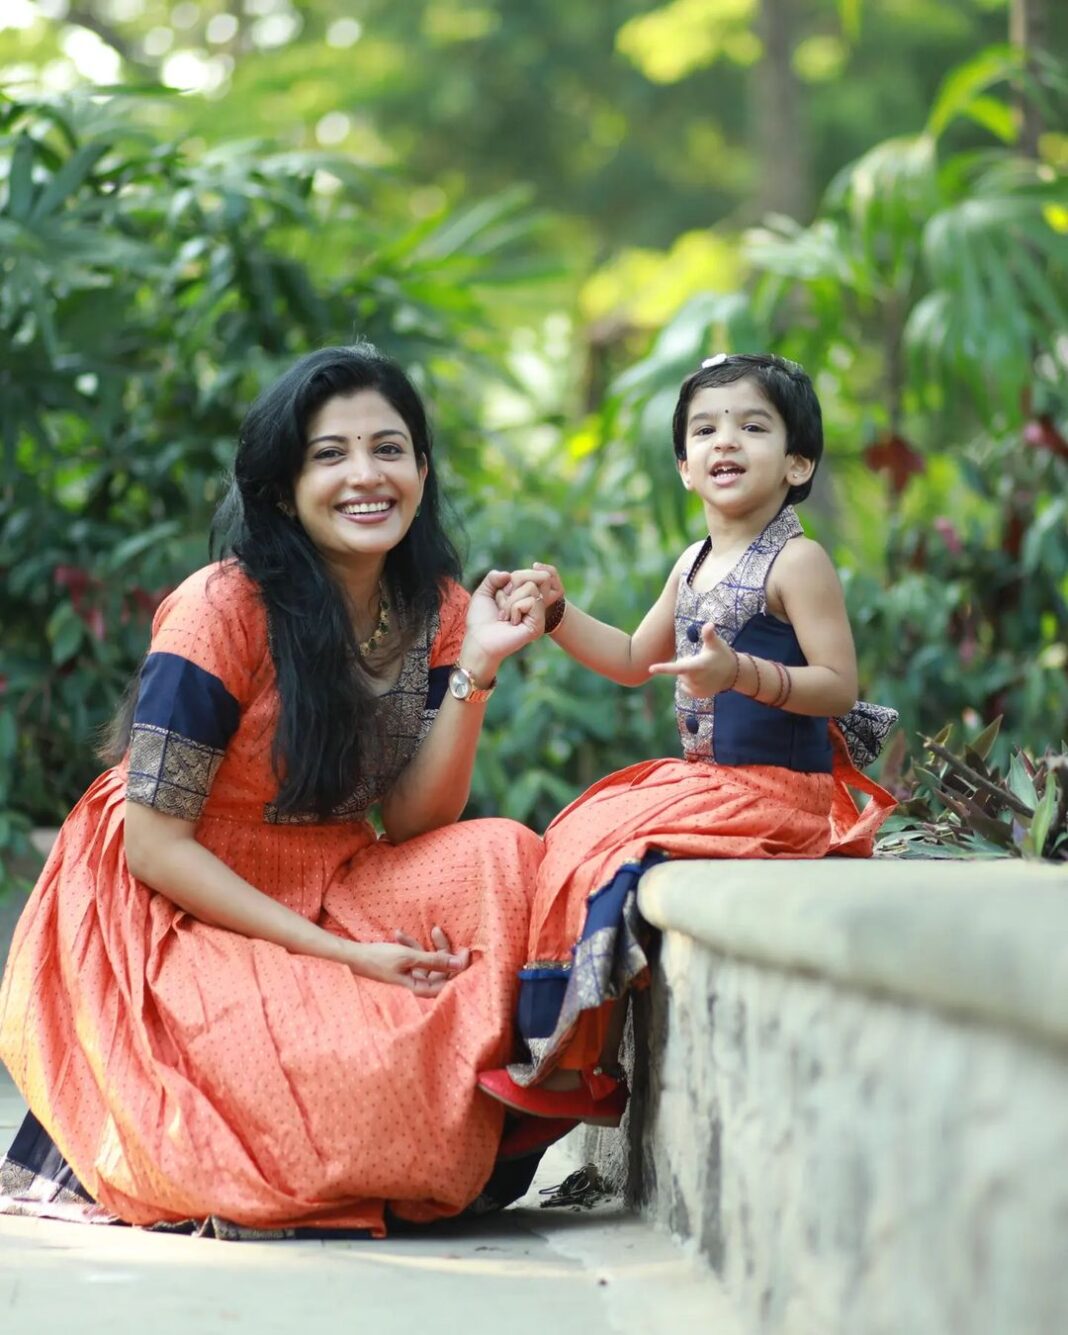 Sshivada Instagram - Like mother, like daughter 🥰😍 Clicked by :@ganesh_anbayeram Outfit : @mom_ssparsh Jewellery : @emin_thahar Styled by : @sushma_subramaniyan #twinning #twinningwithdaughter #mylittleprincess #Arundhathi #mybundleofjoy #traditionalwear #ethnicwear #daughter #daughterlove #classic #festivecollection #weekend #weekendvibes